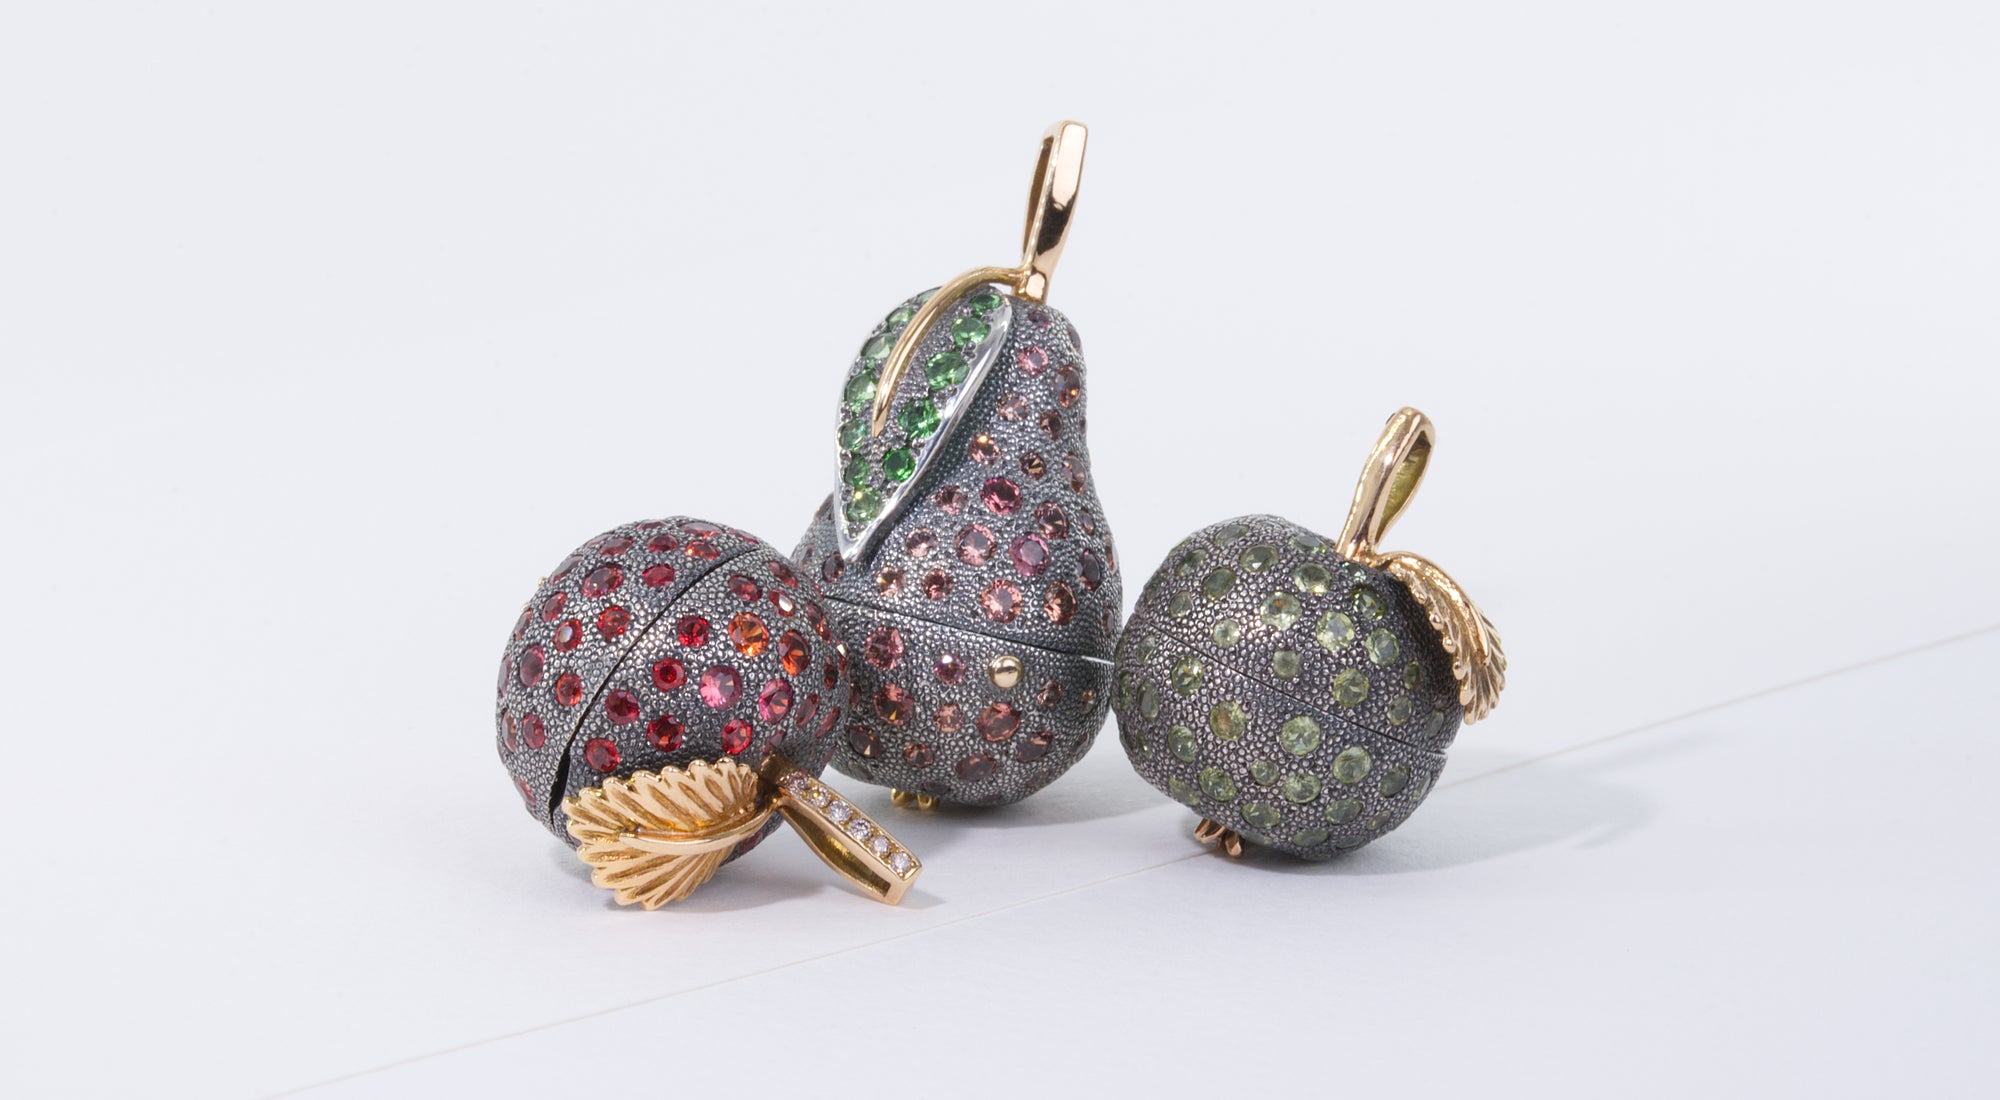 The Orchard Collection by Ewa Z. Sleziona Jewellery